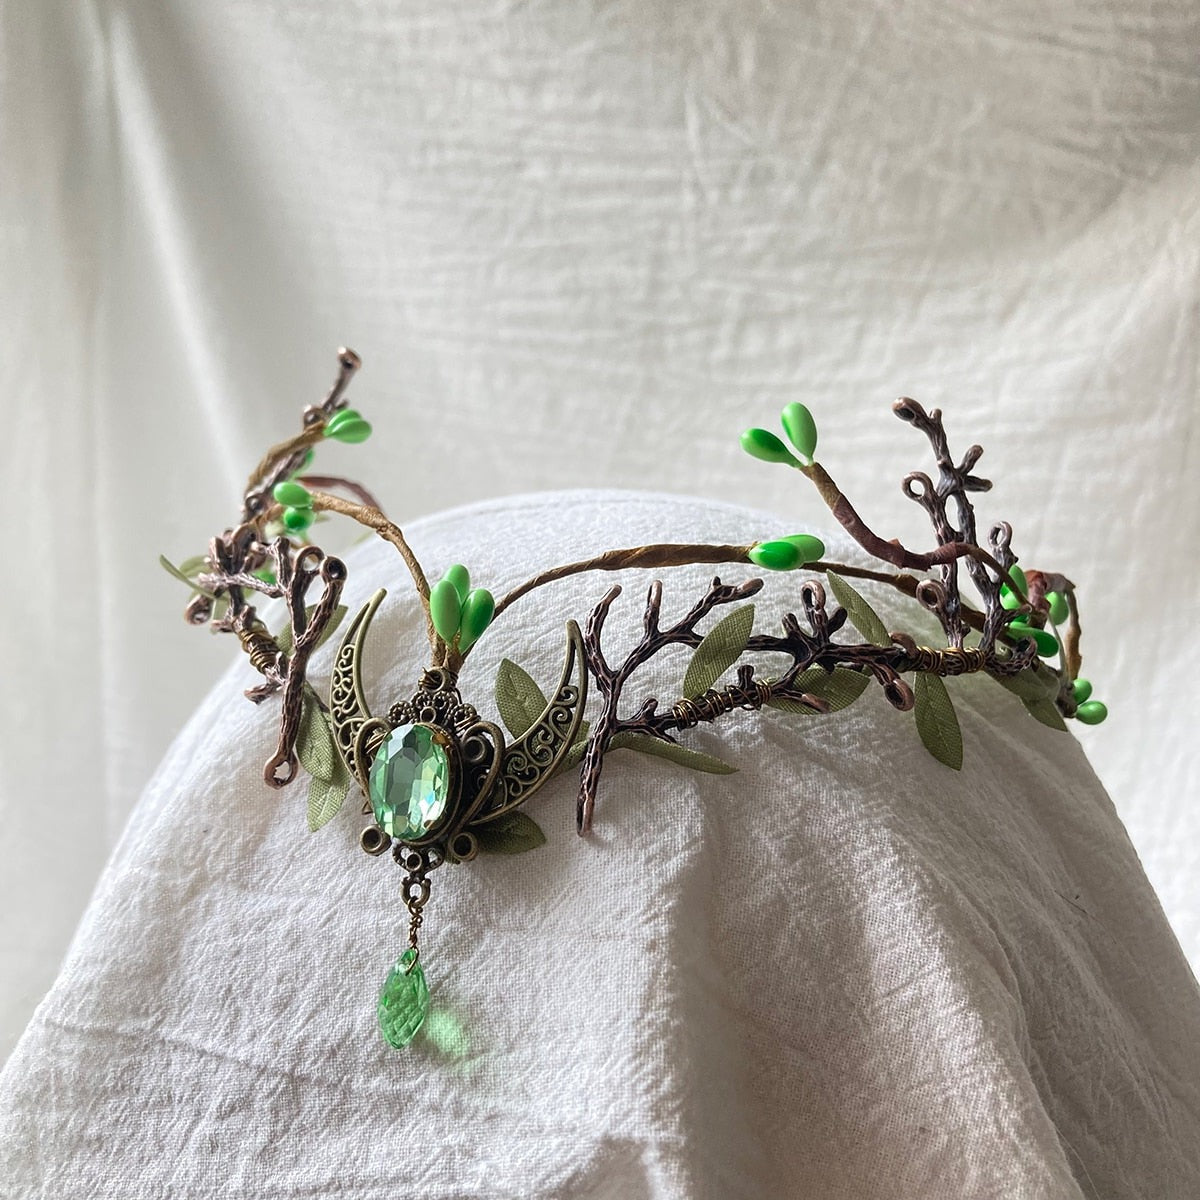 Boughs of the Enchanted Elven Forest Cottagecore Princesscore Fairycore Coquette Gothic Kawaii Tiara Hair Accessory